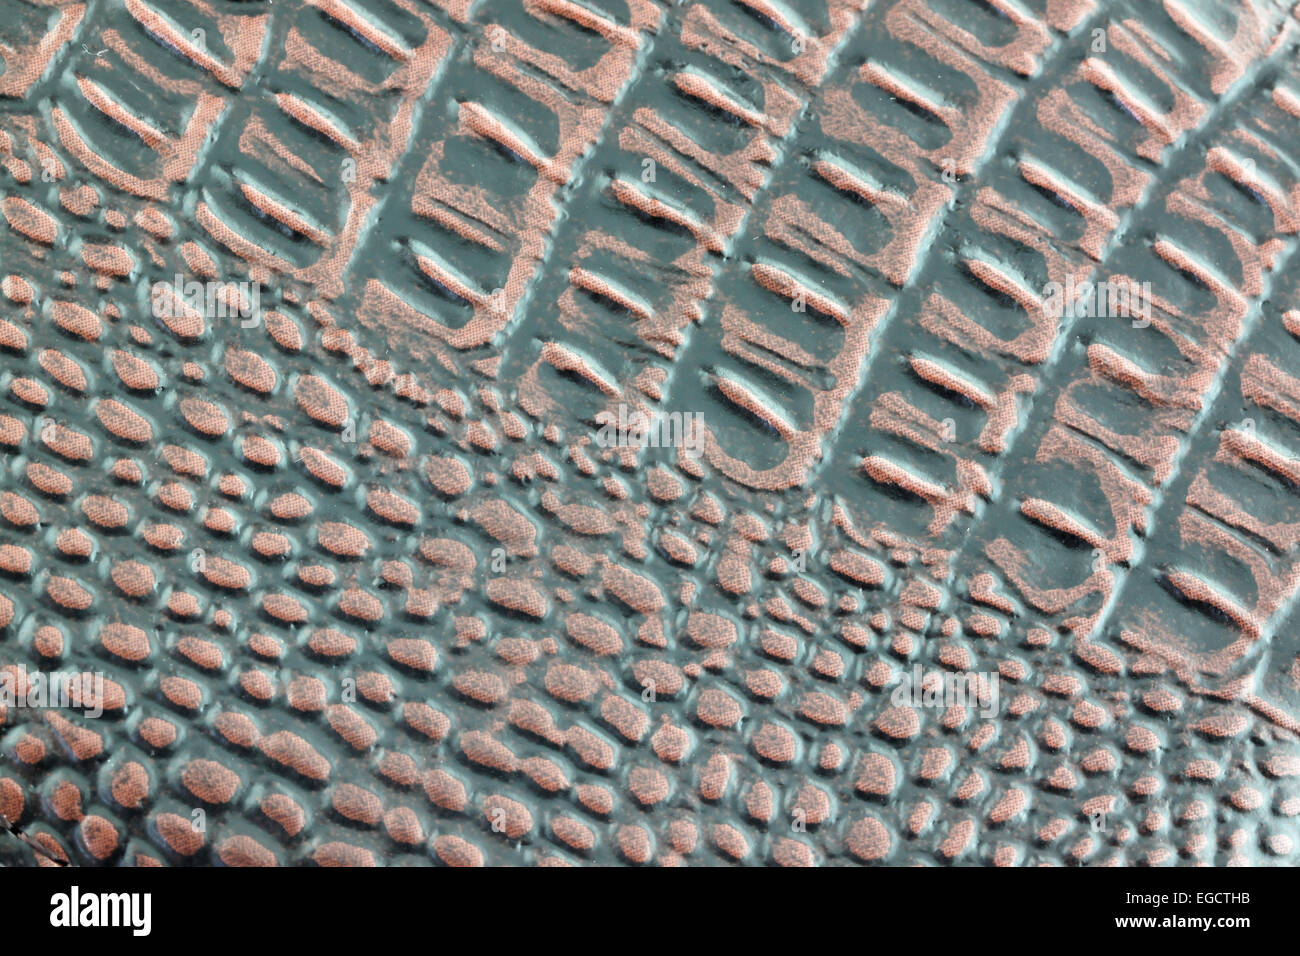 Textured and pattern of dark brown leather for the background. Stock Photo